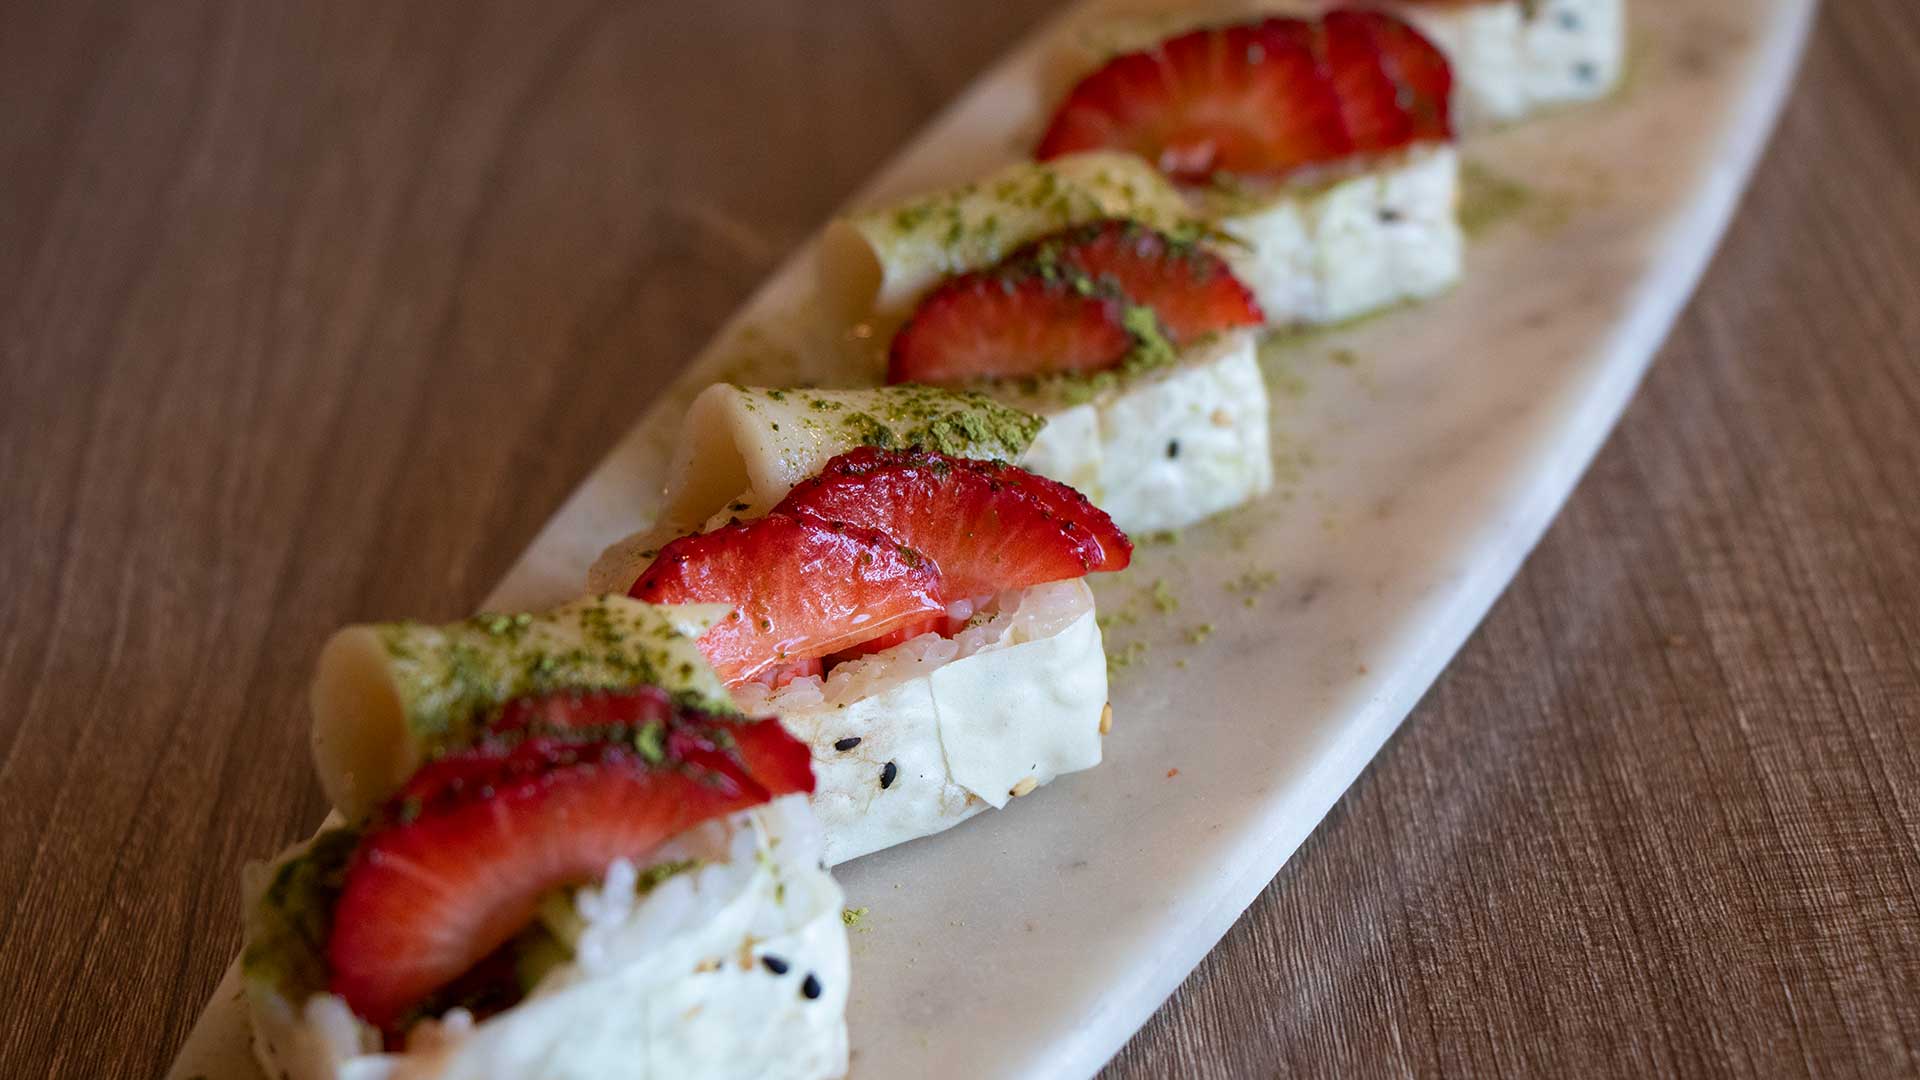 Strawberry Field sushi roll topped with matcha powder